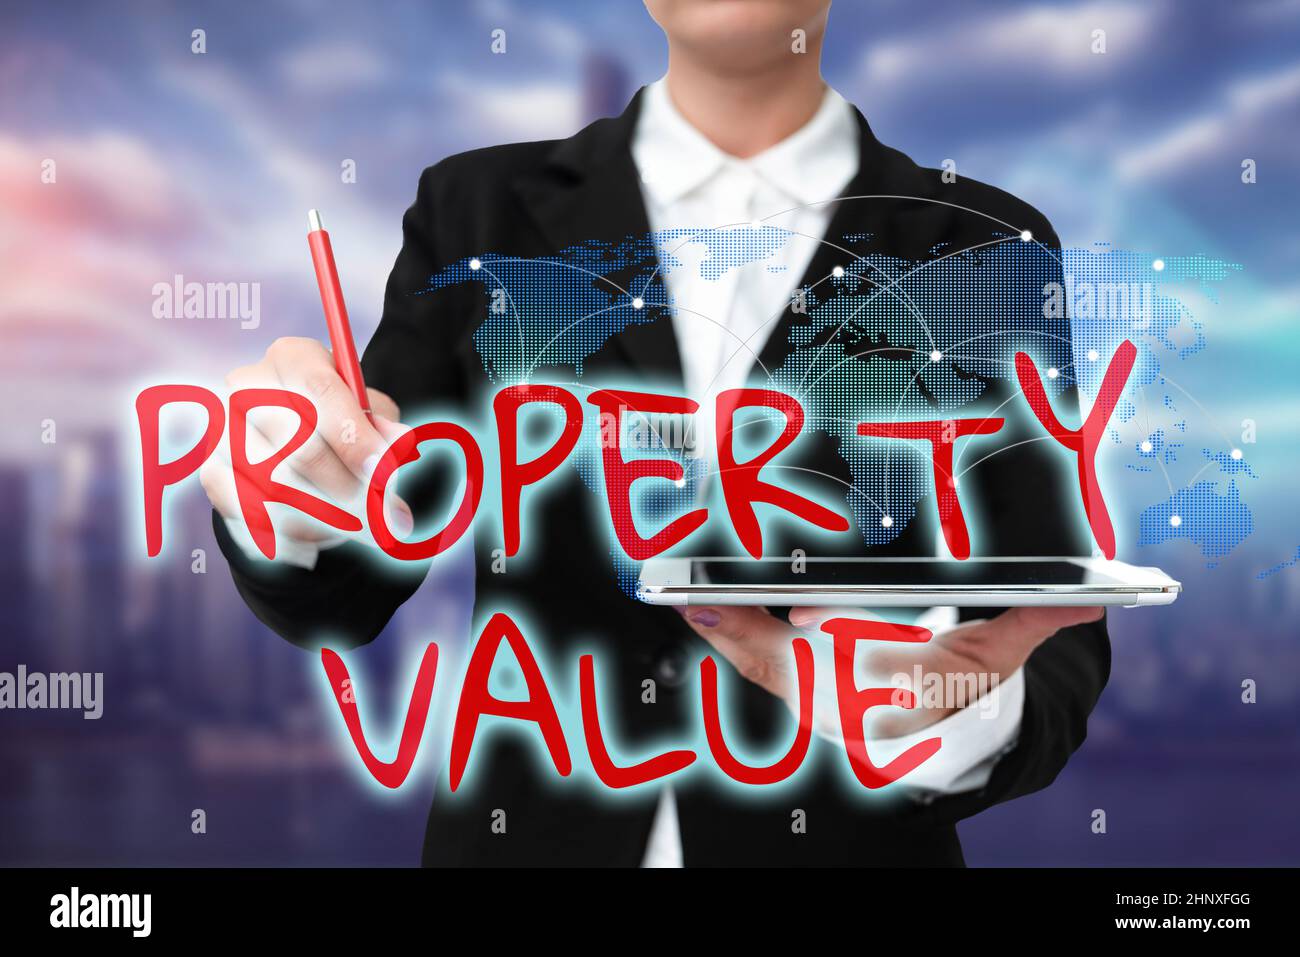 Conceptual display Property Value, Business idea Worth of a land Real estate appraisal Fair market price Lady In Uniform Standing Holding Tablet Typin Stock Photo